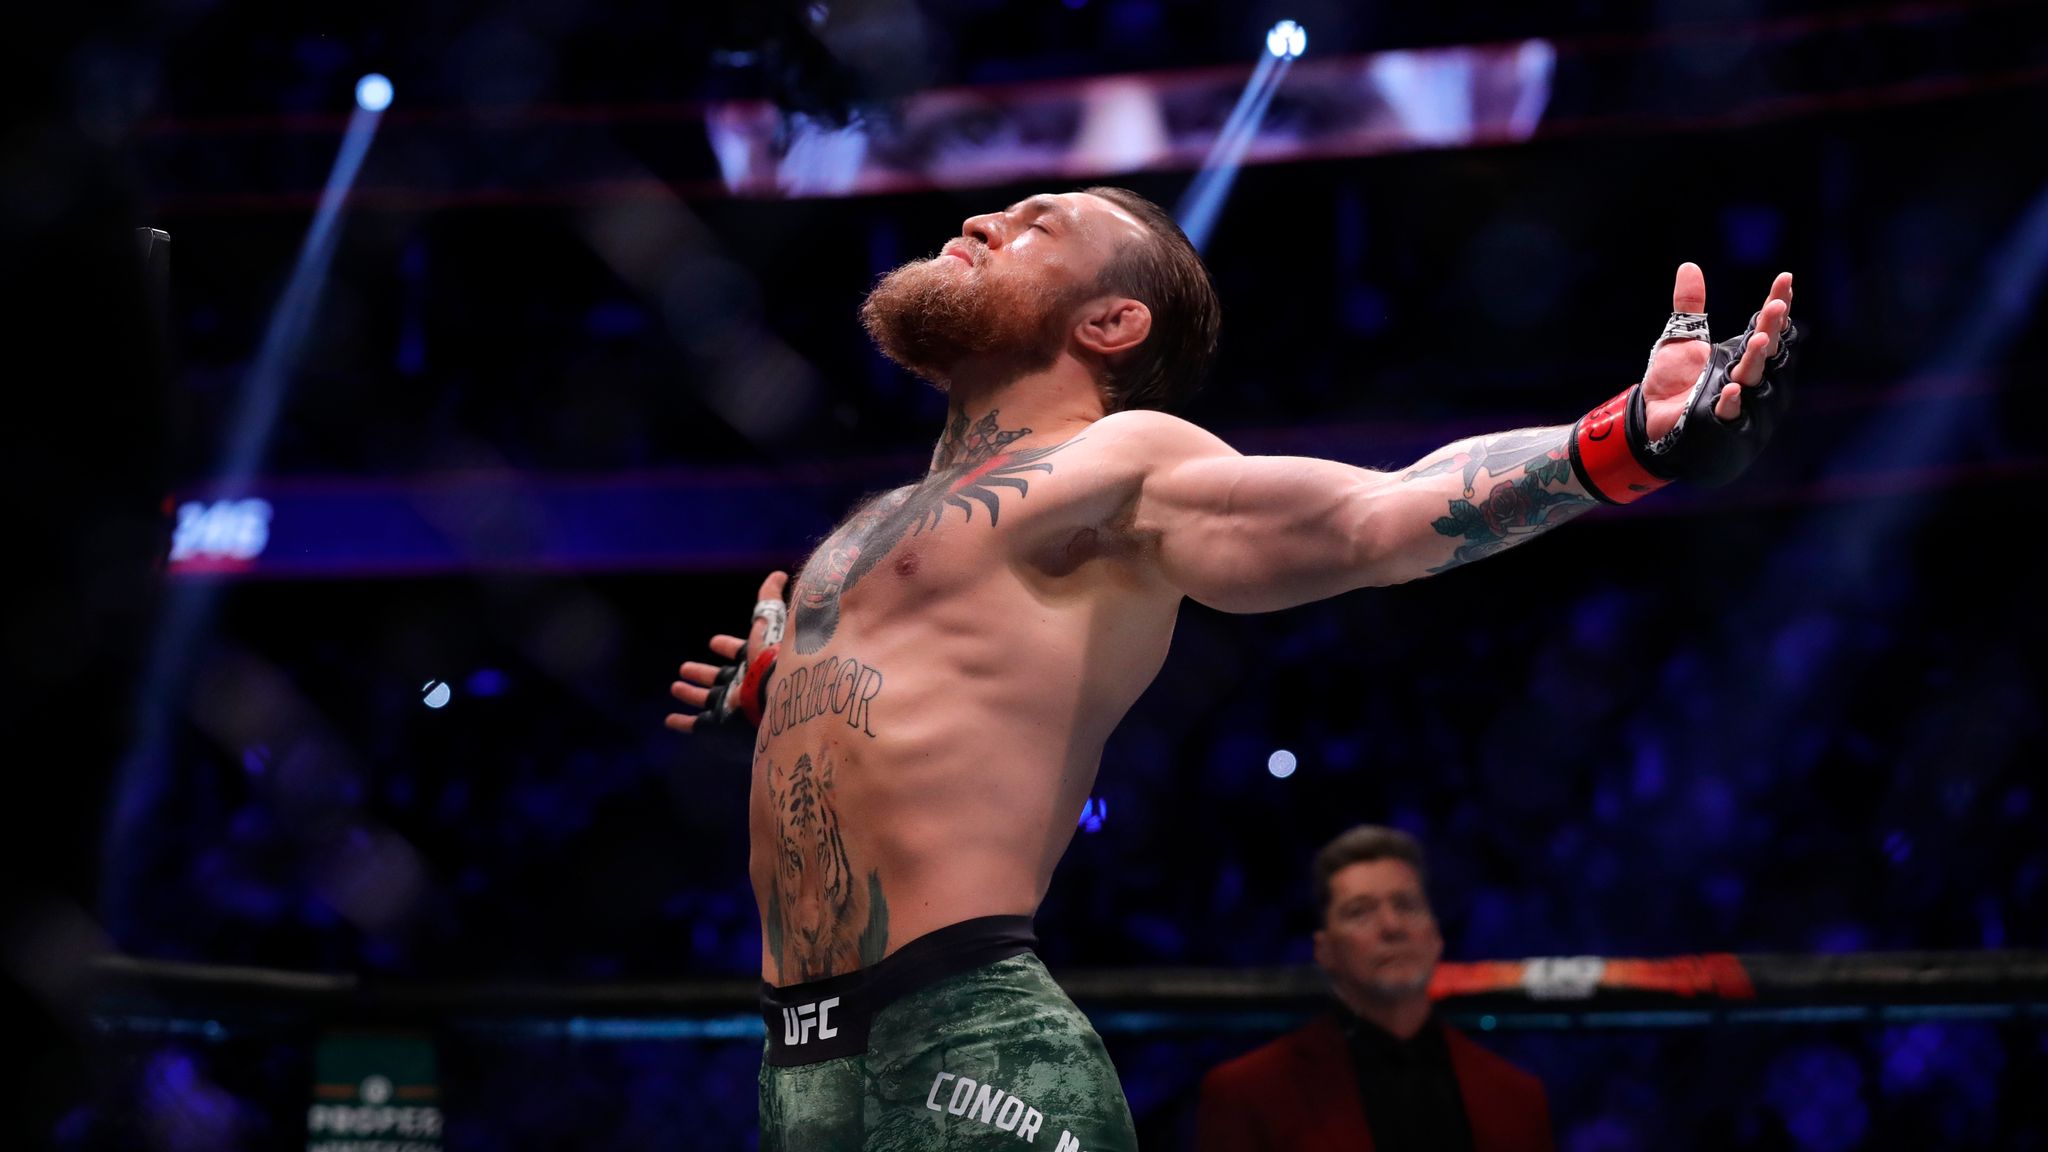 Conor McGregor will return to fight at welterweight, believes Chael